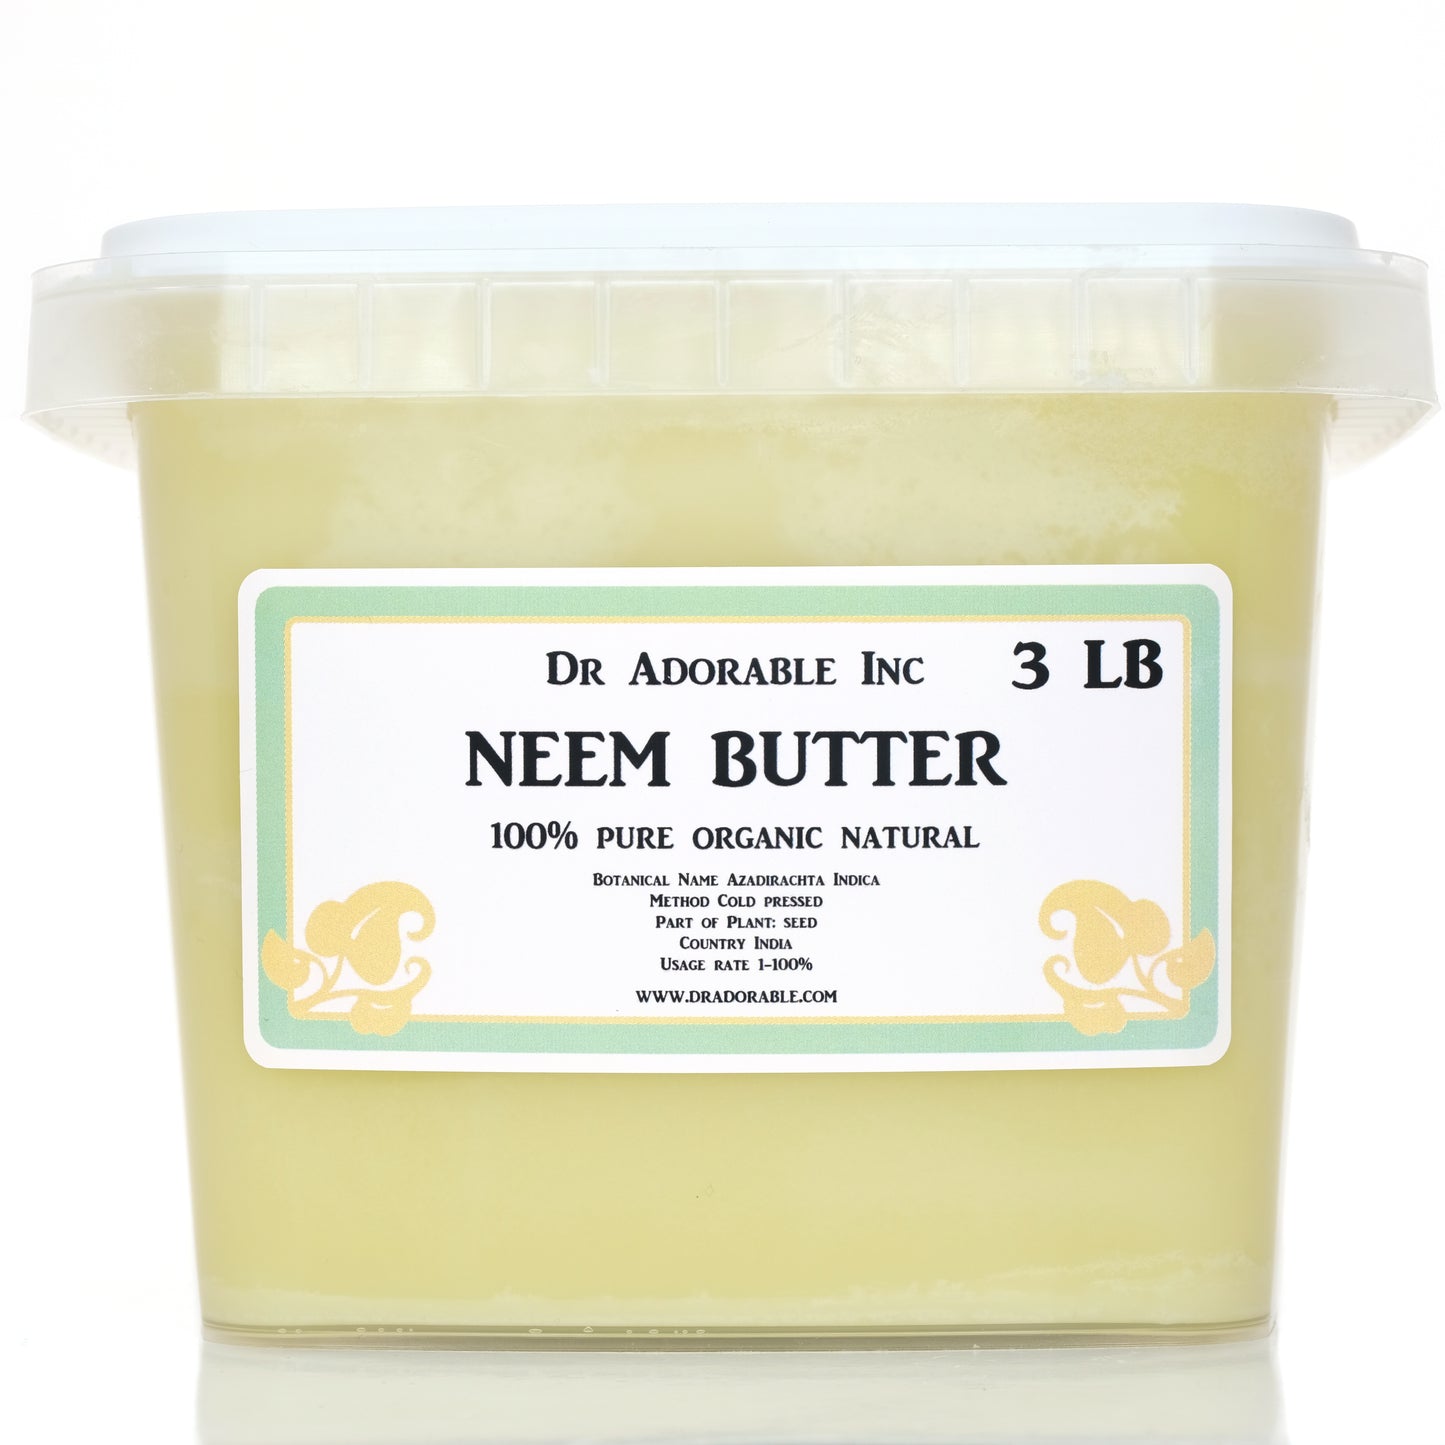 Neem Seed Butter - Unrefined Pure Natural Premium Organic Cold Pressed Raw